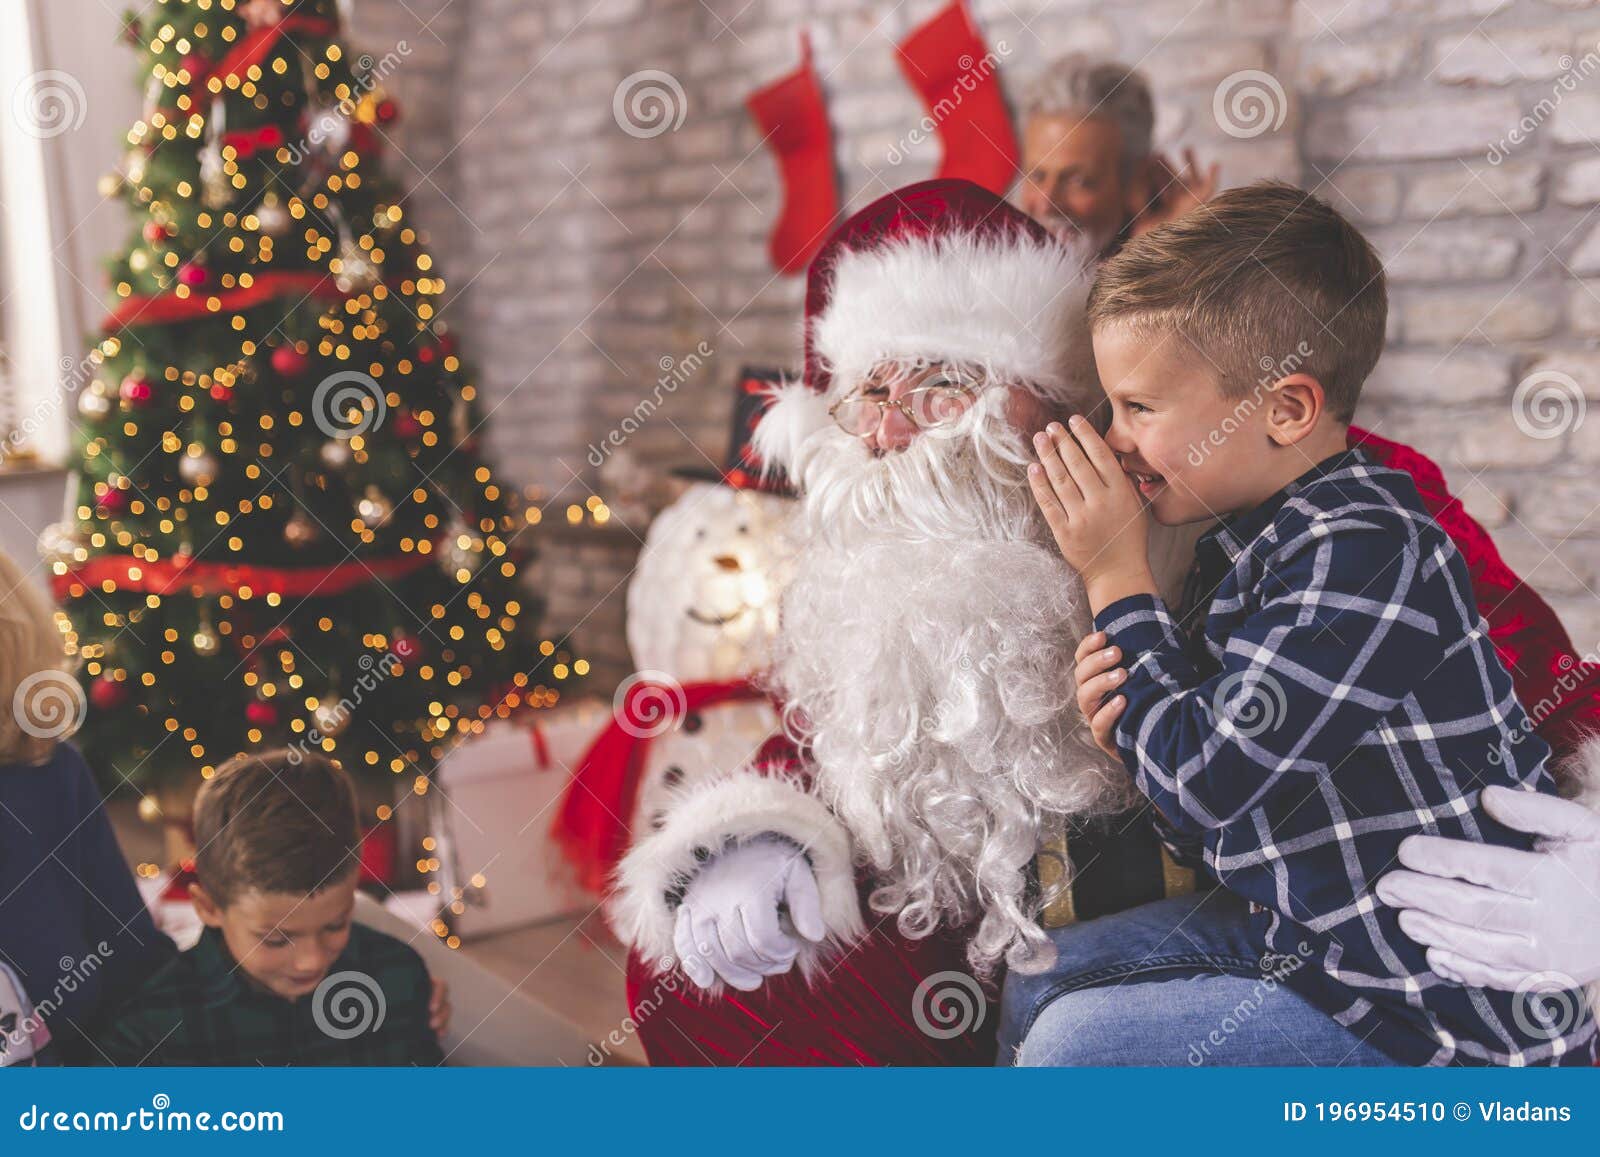 little boy sitting in santas lap whispering wishes for christmas presents